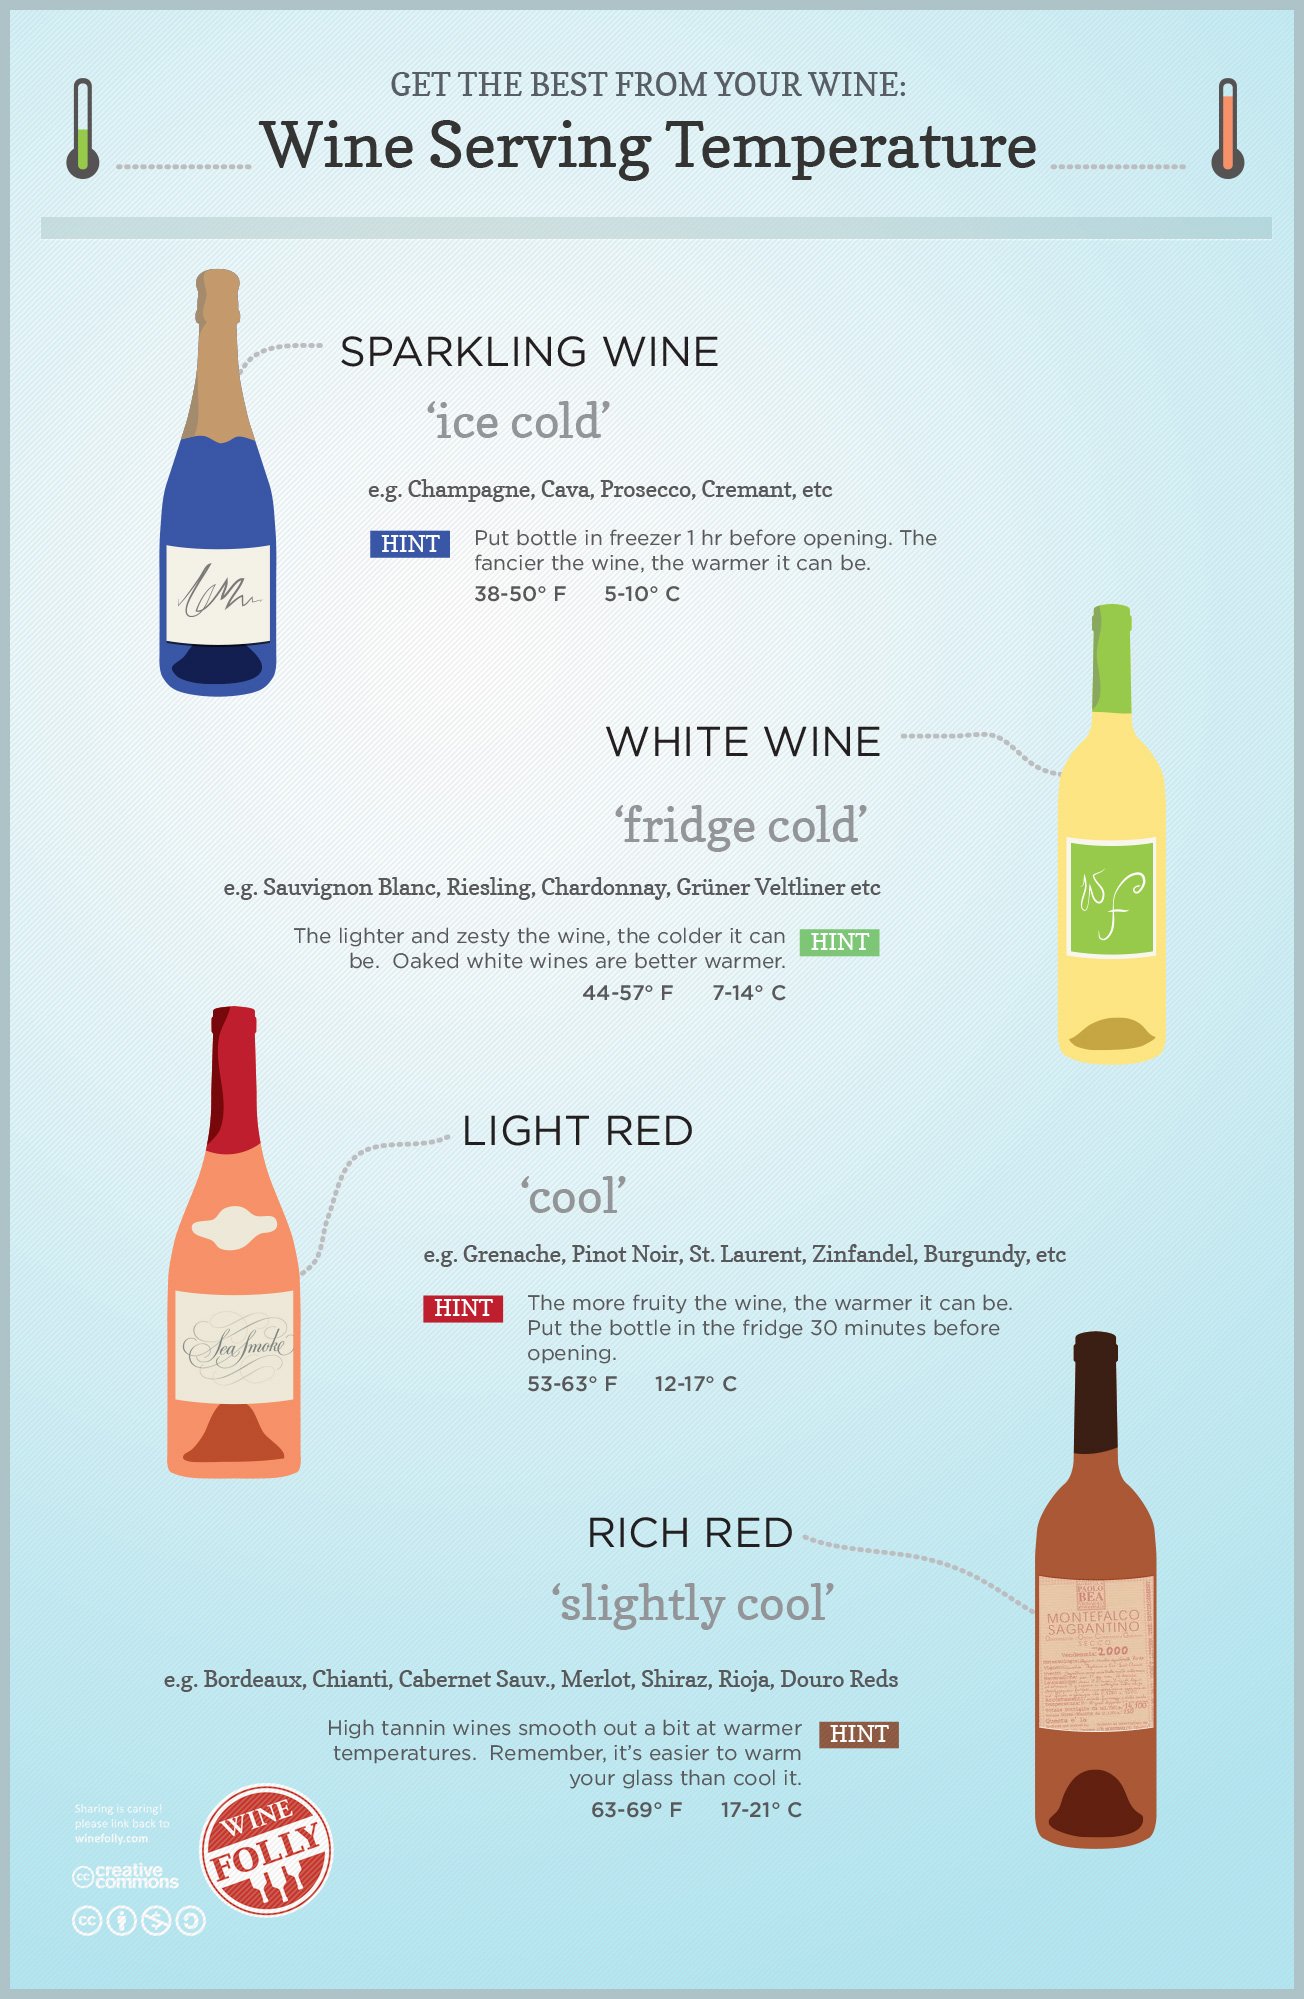 What is the ideal temperature to store and serve wine?